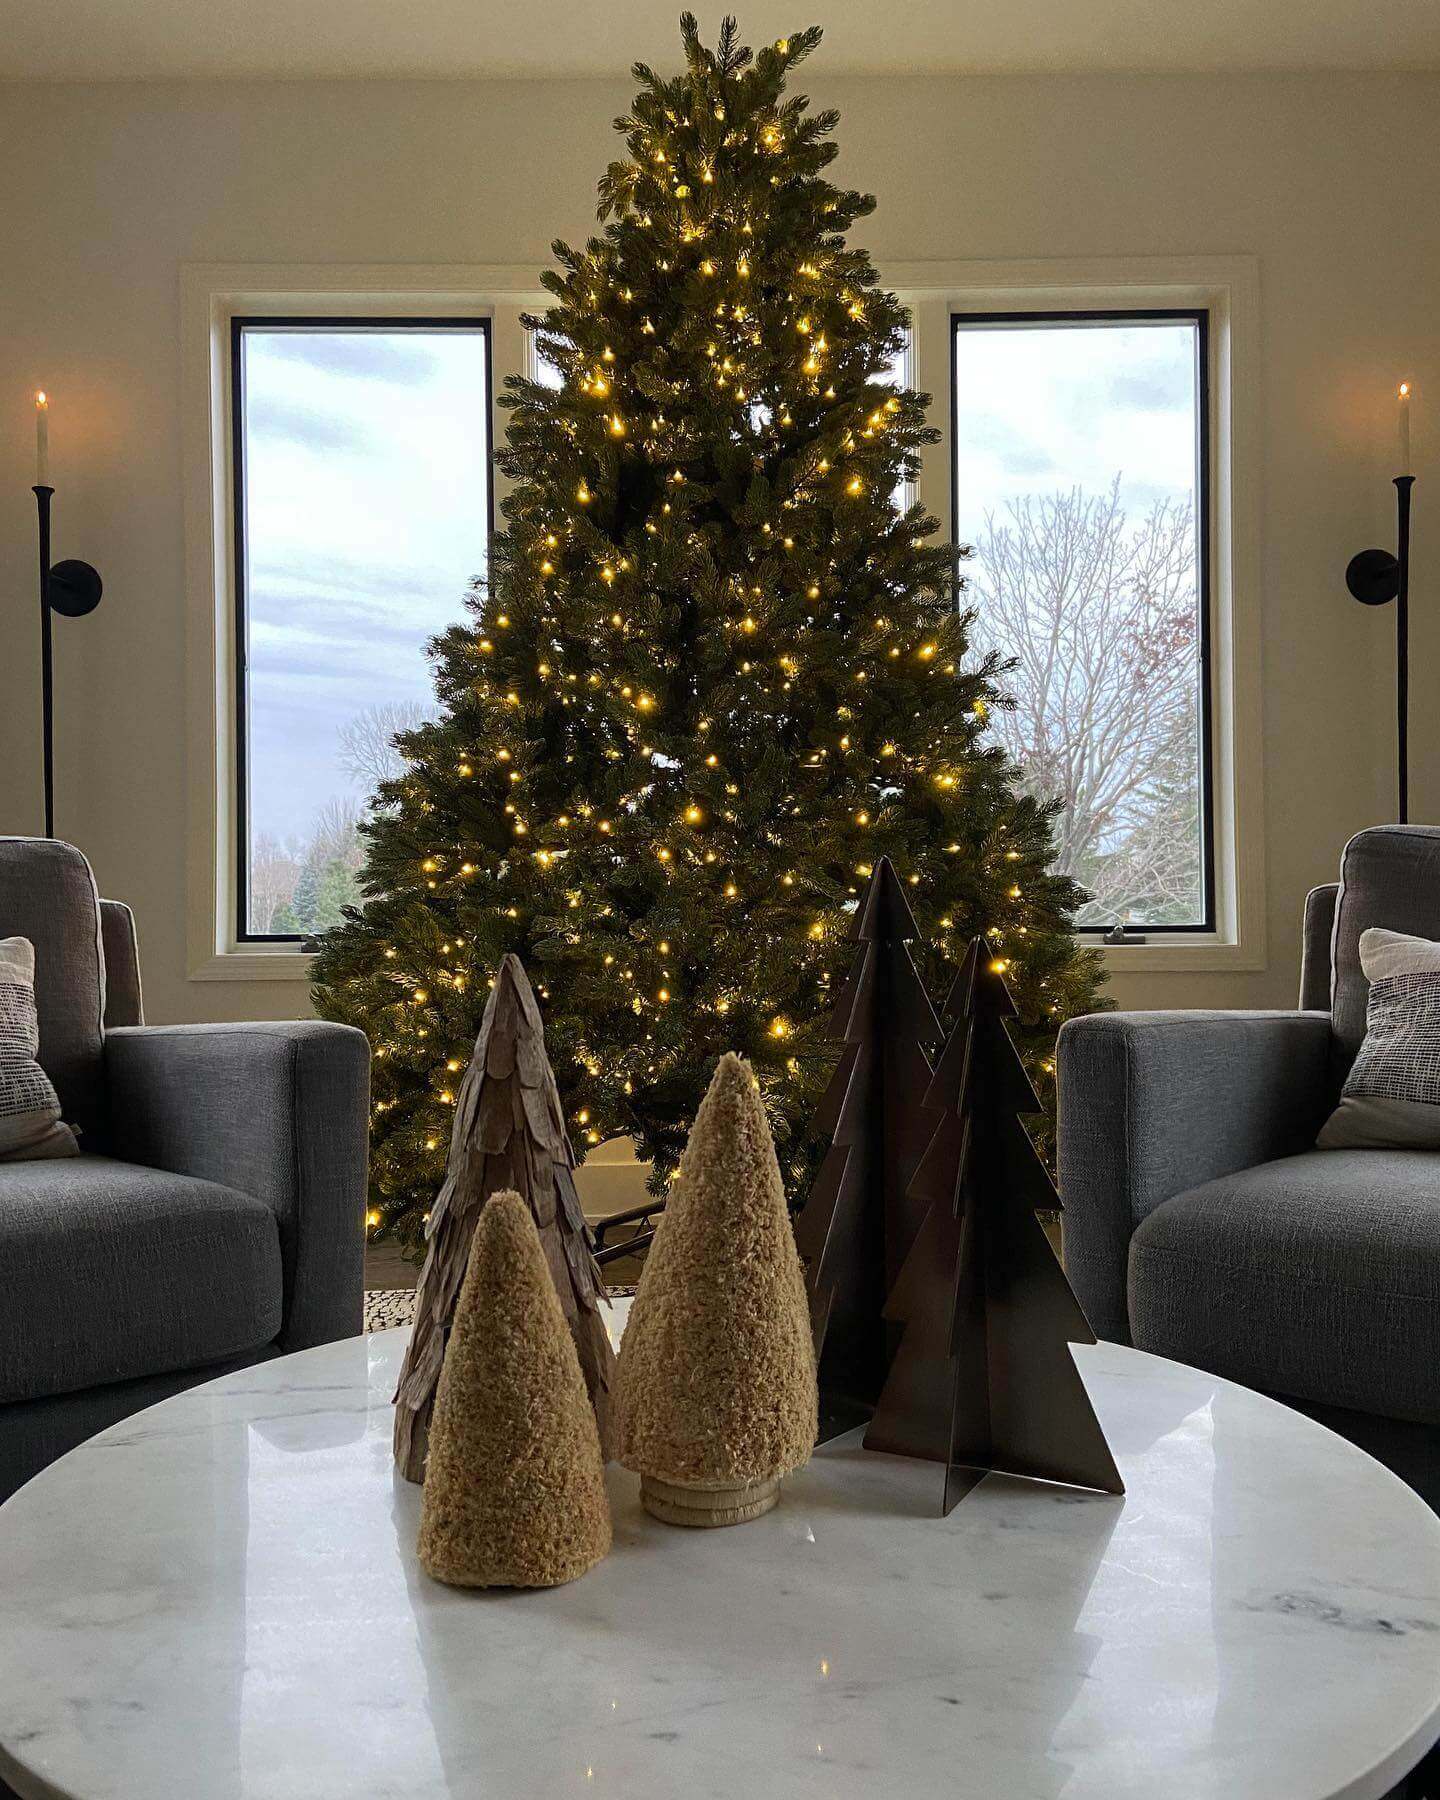 King of Christmas 7.5' Cypress Spruce Quick-Shape Artificial Christmas Tree Unlit